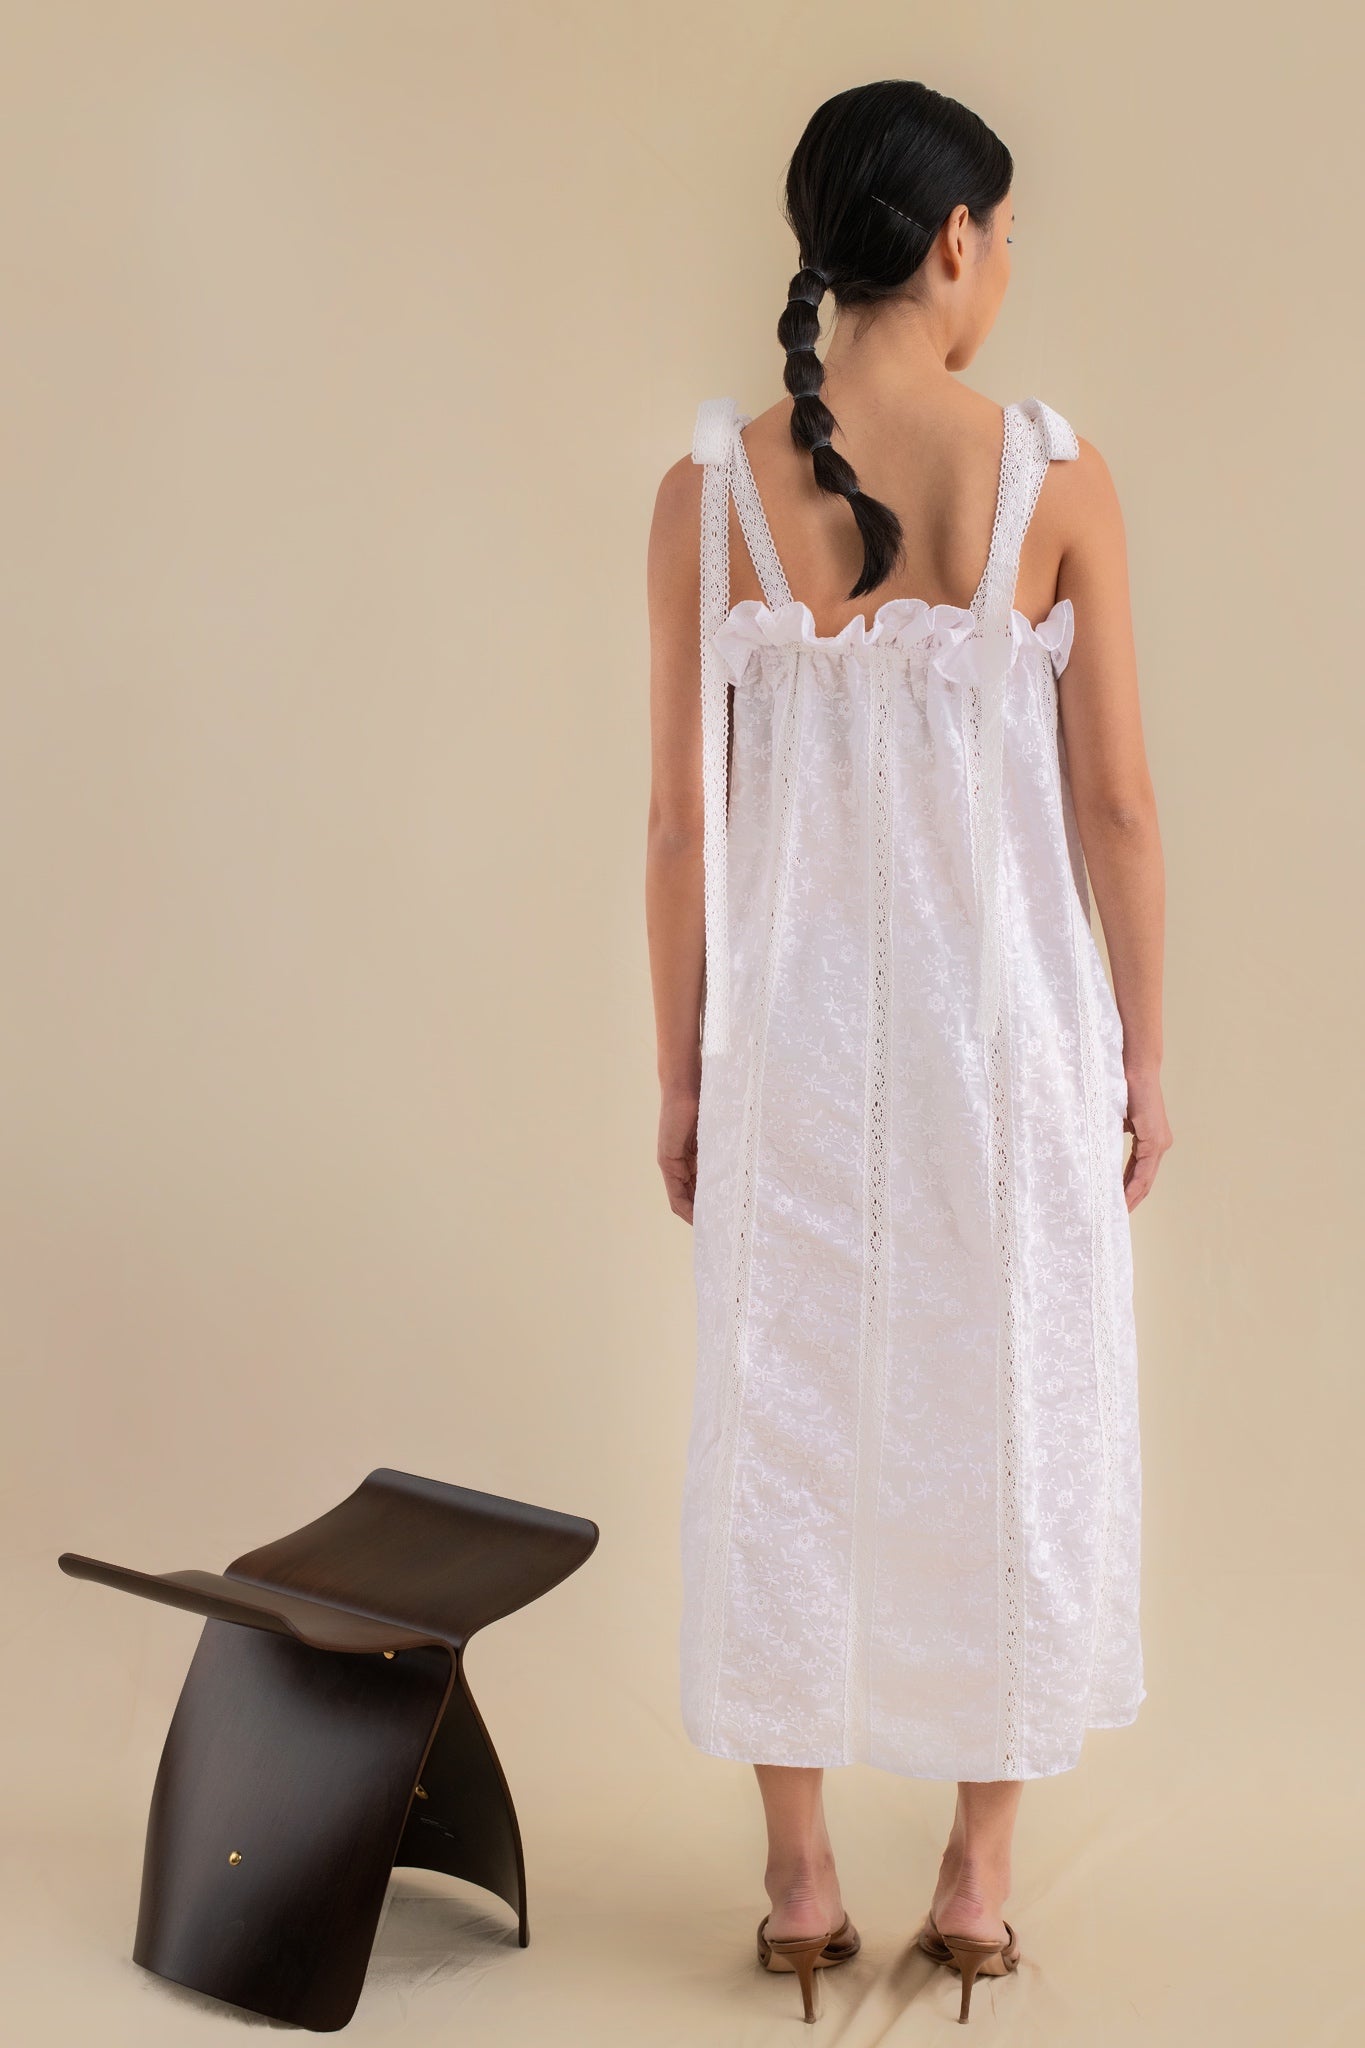 Laundry Studio Clothing Store Singapore Panelled Lace Broderie Anglaise White Cotton Dress Back View